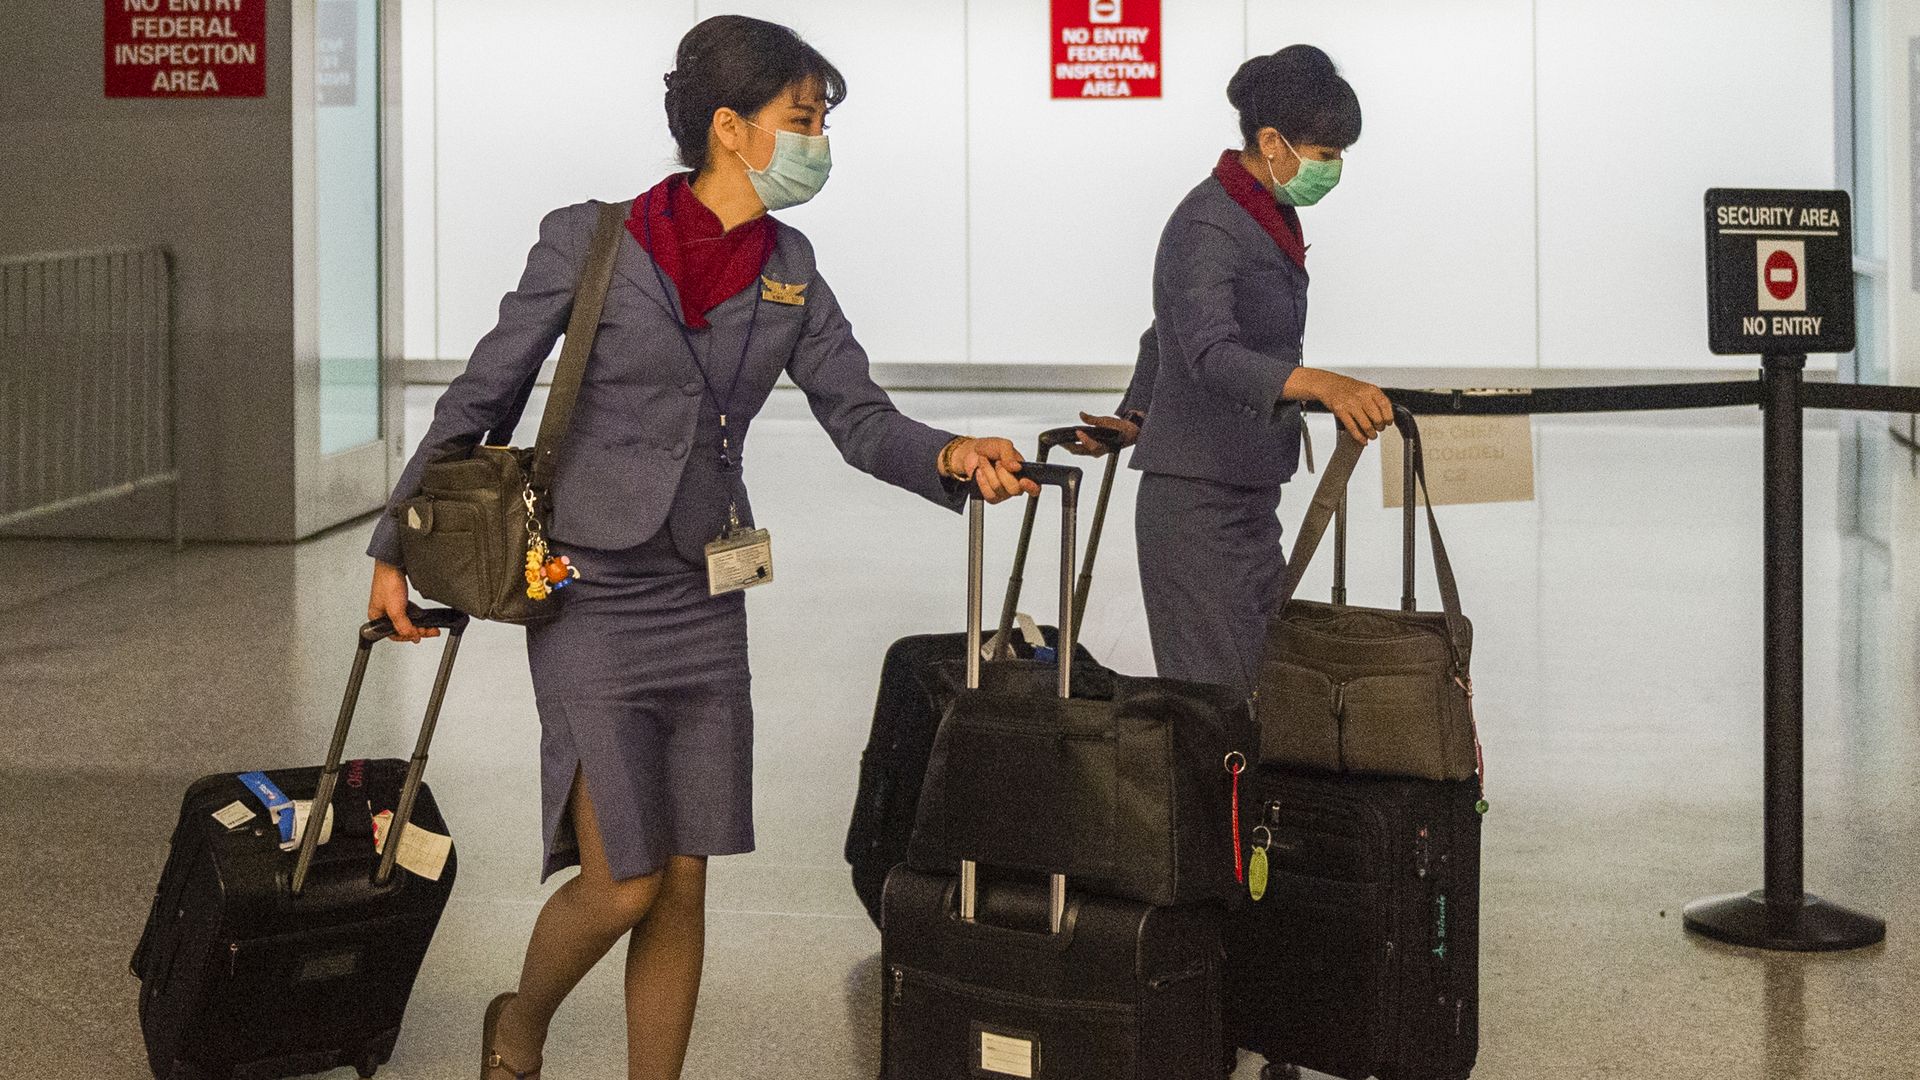 In this image, two flight attendants board a plane while wearing medical face masks.